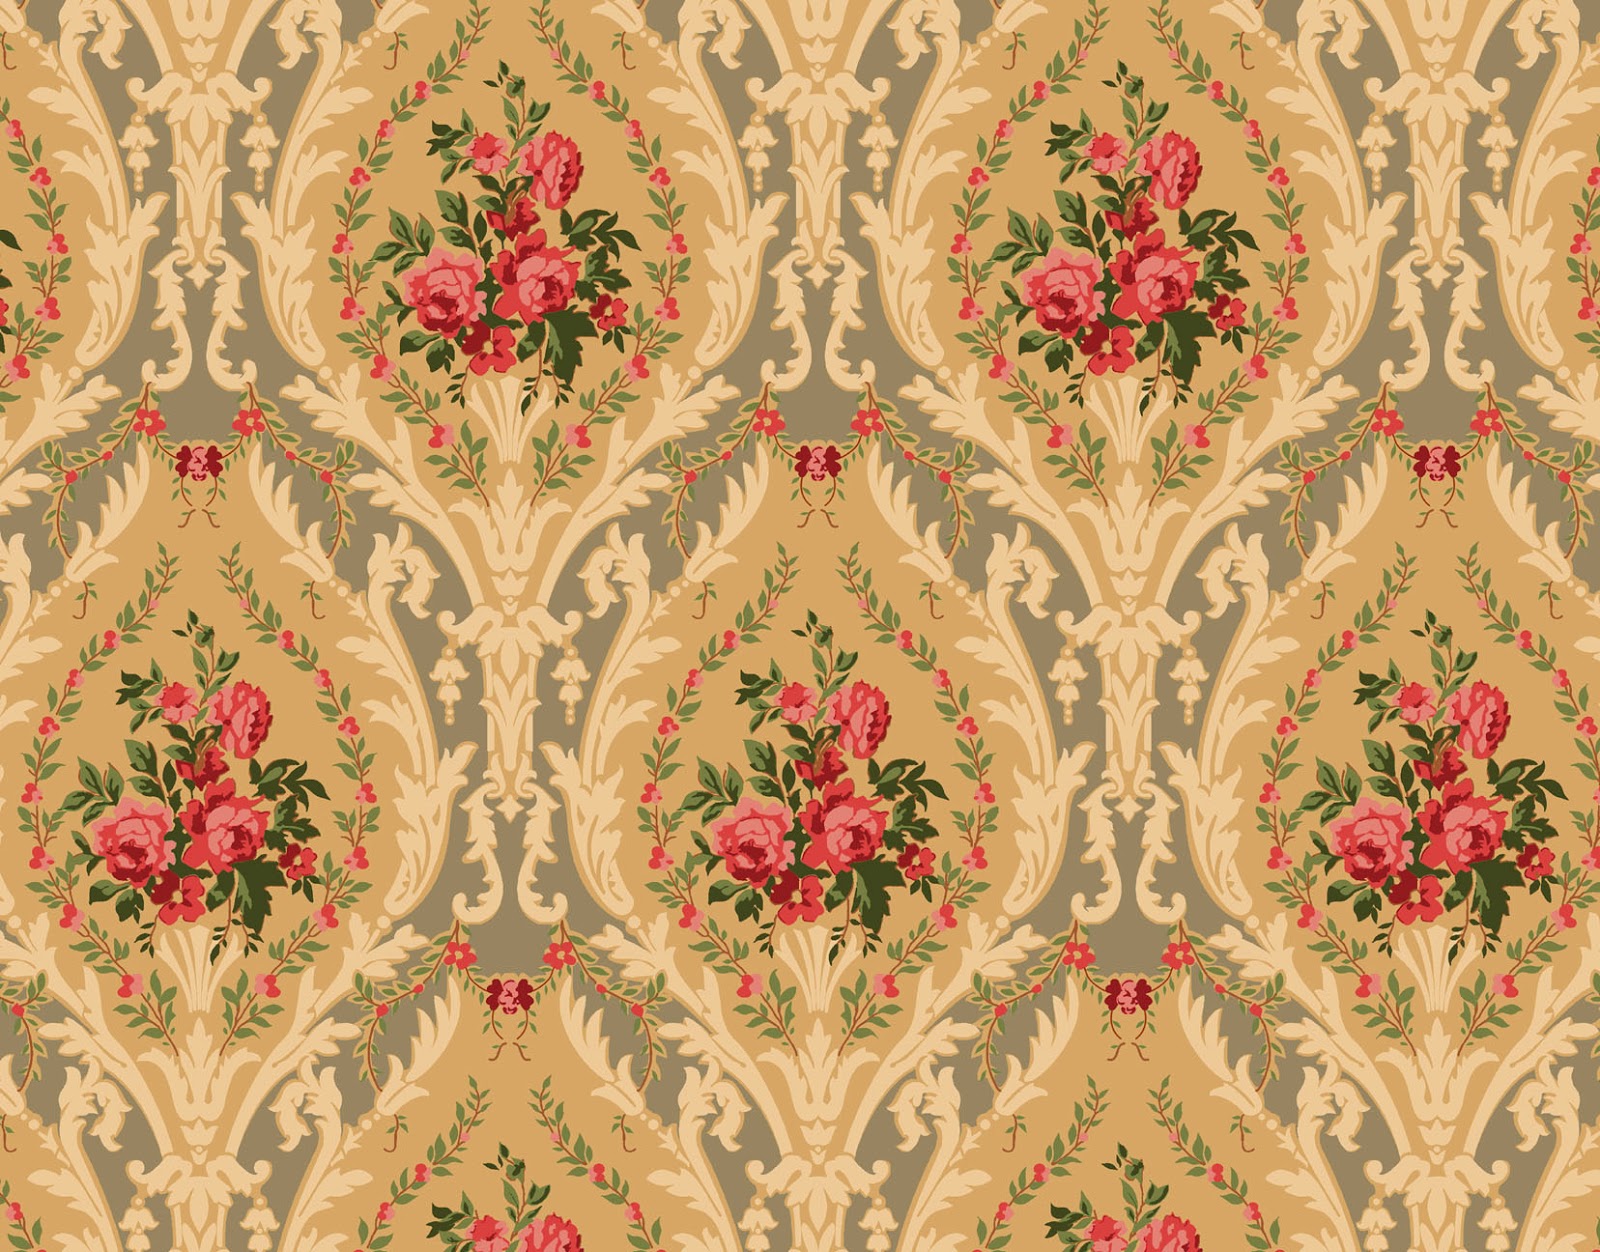 Like Some Wallpaper I Found From The Arts And Crafts Movement